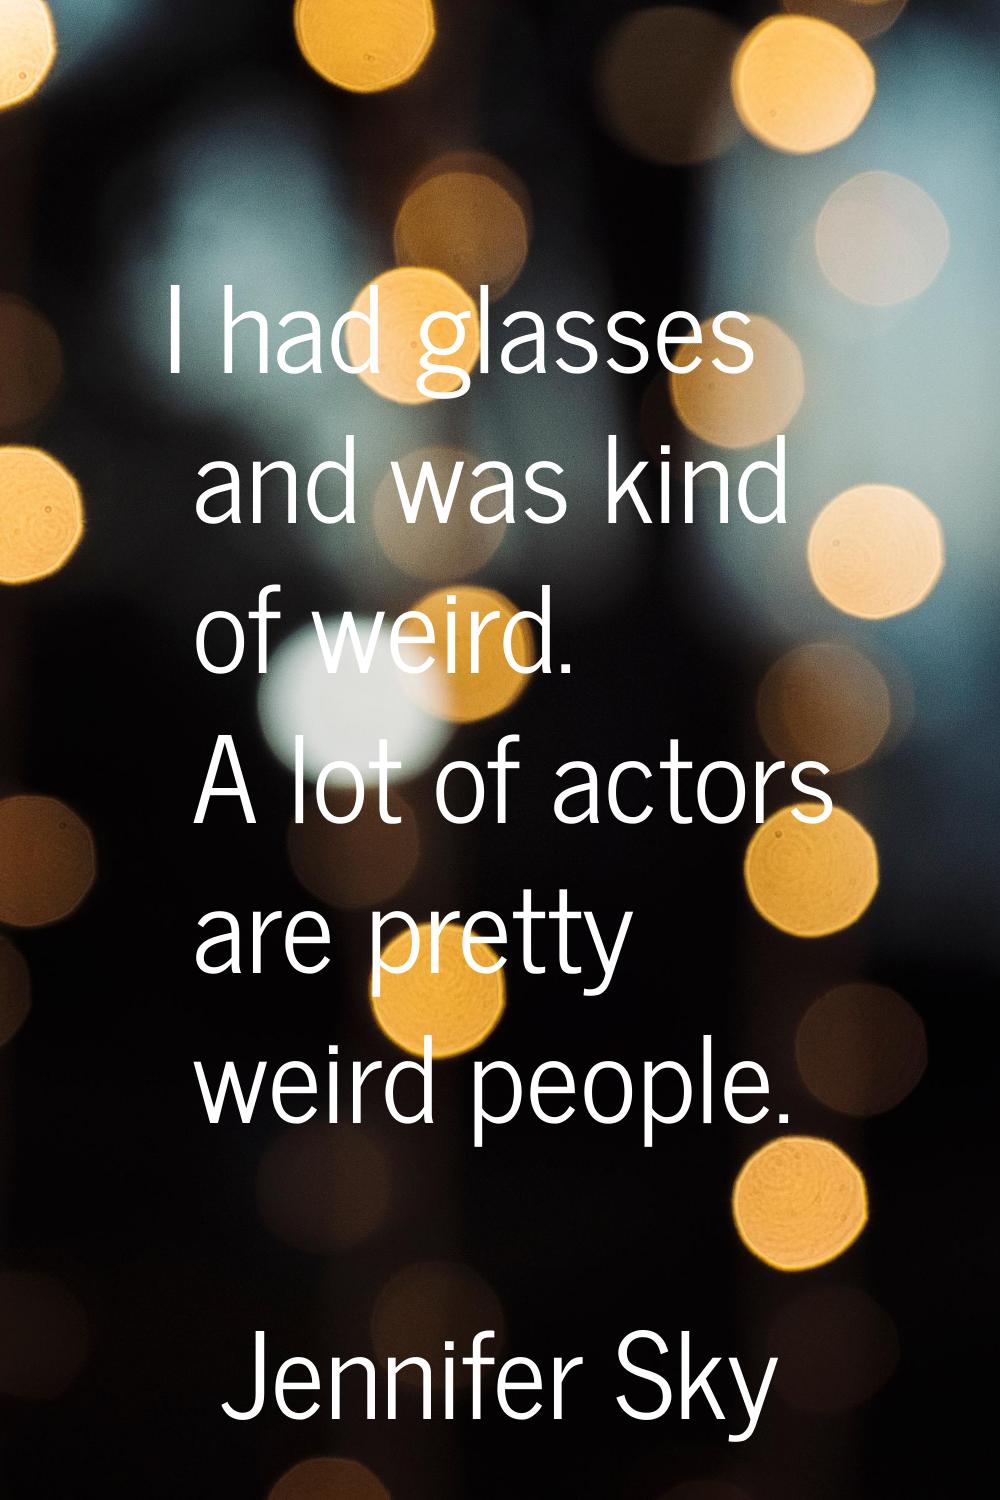 I had glasses and was kind of weird. A lot of actors are pretty weird people.